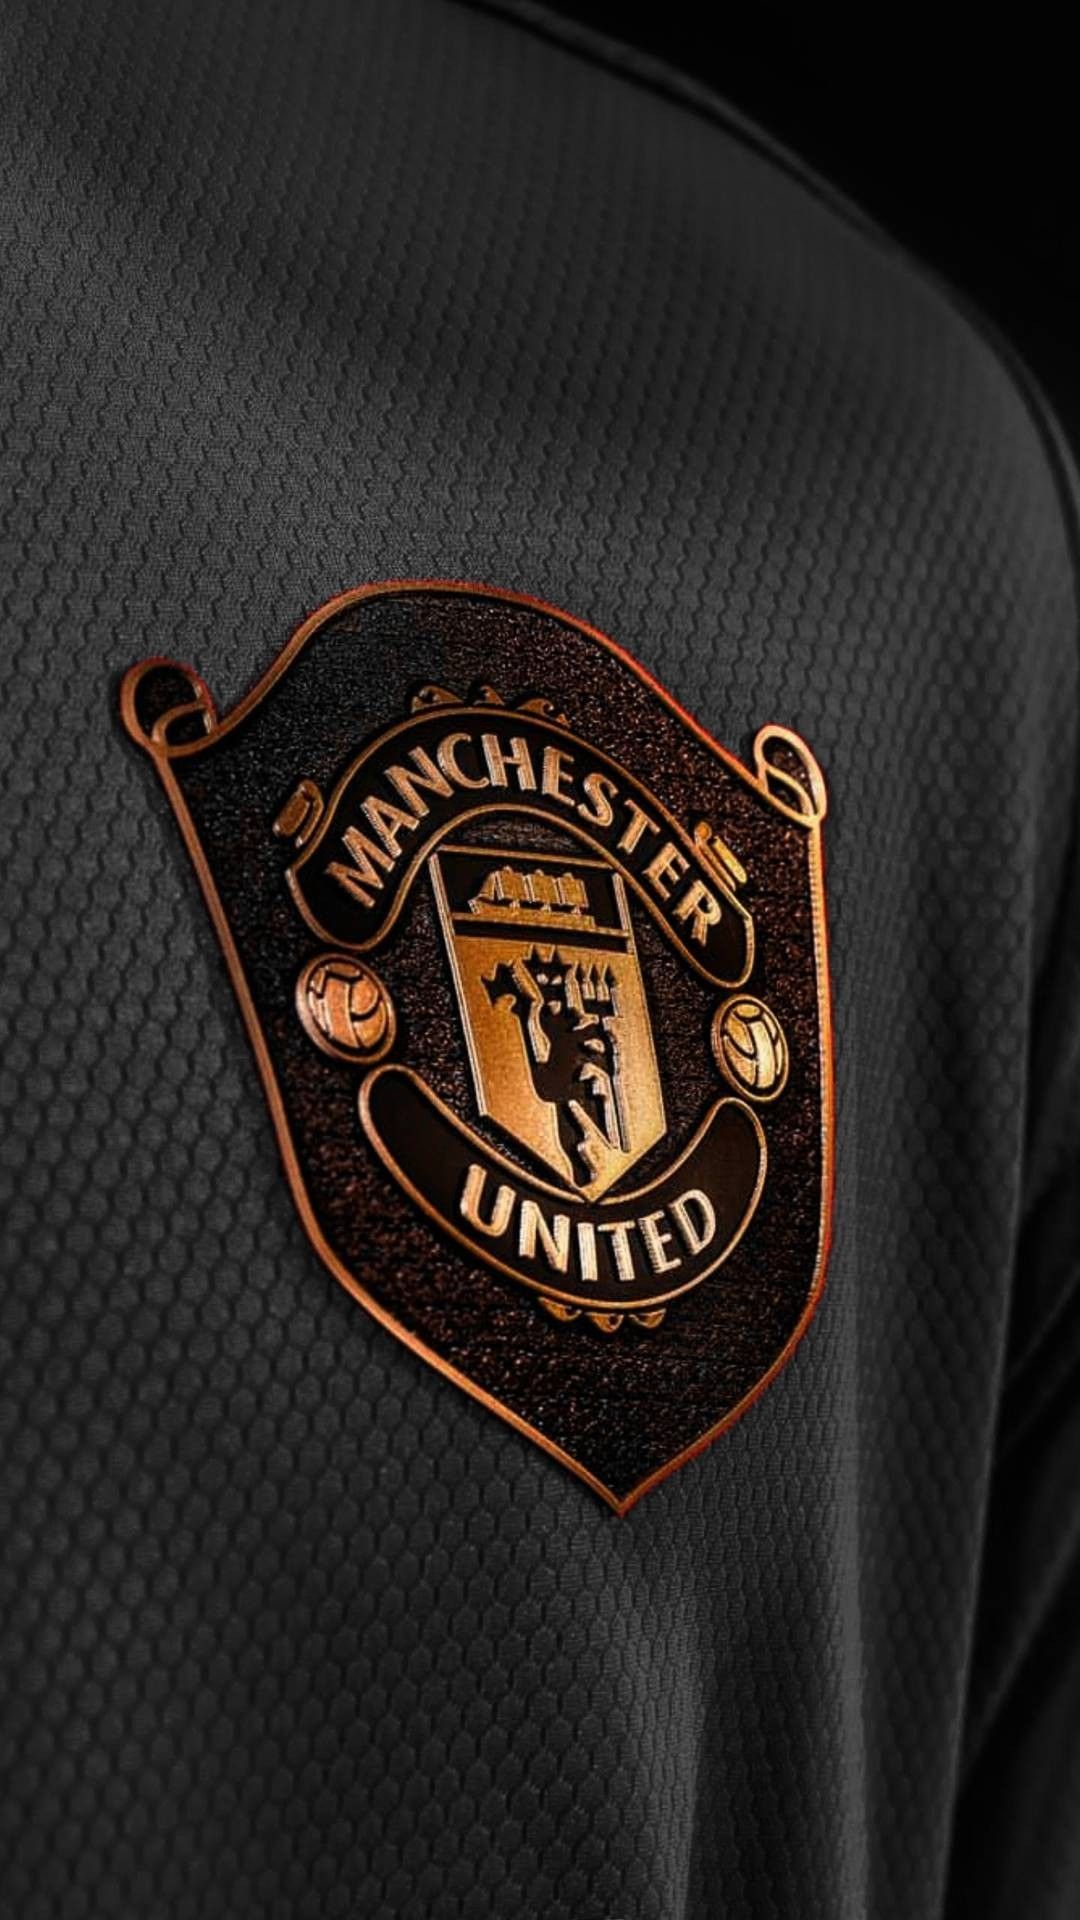 Man Utd Wallpaper 2021 - Manchester United Wallpapers Hd And 4k